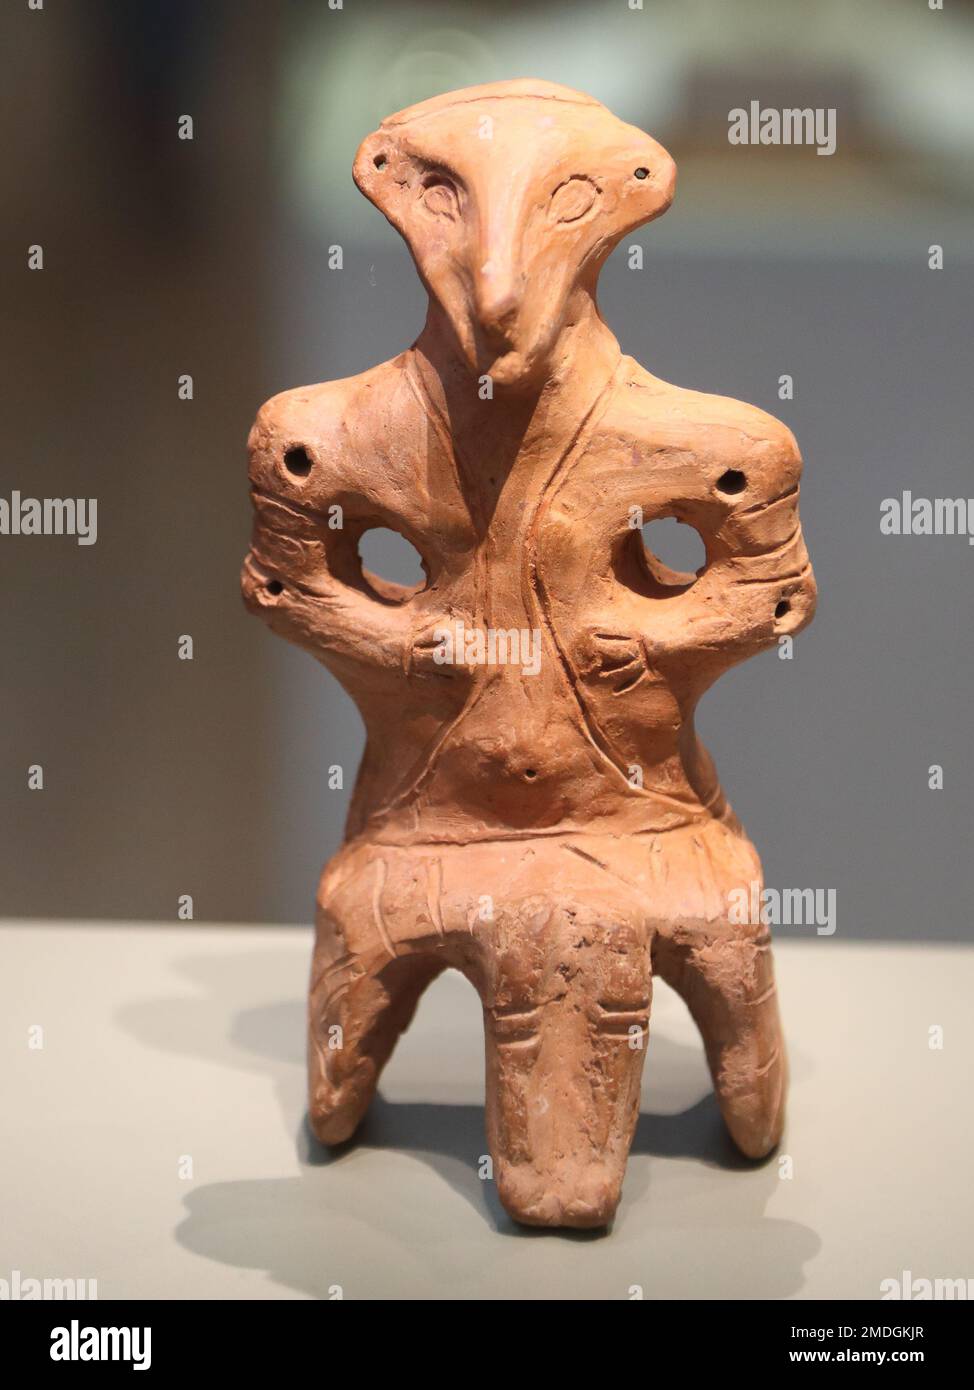 Clay Figurines - Smithsonian's National Museum of Asian Art